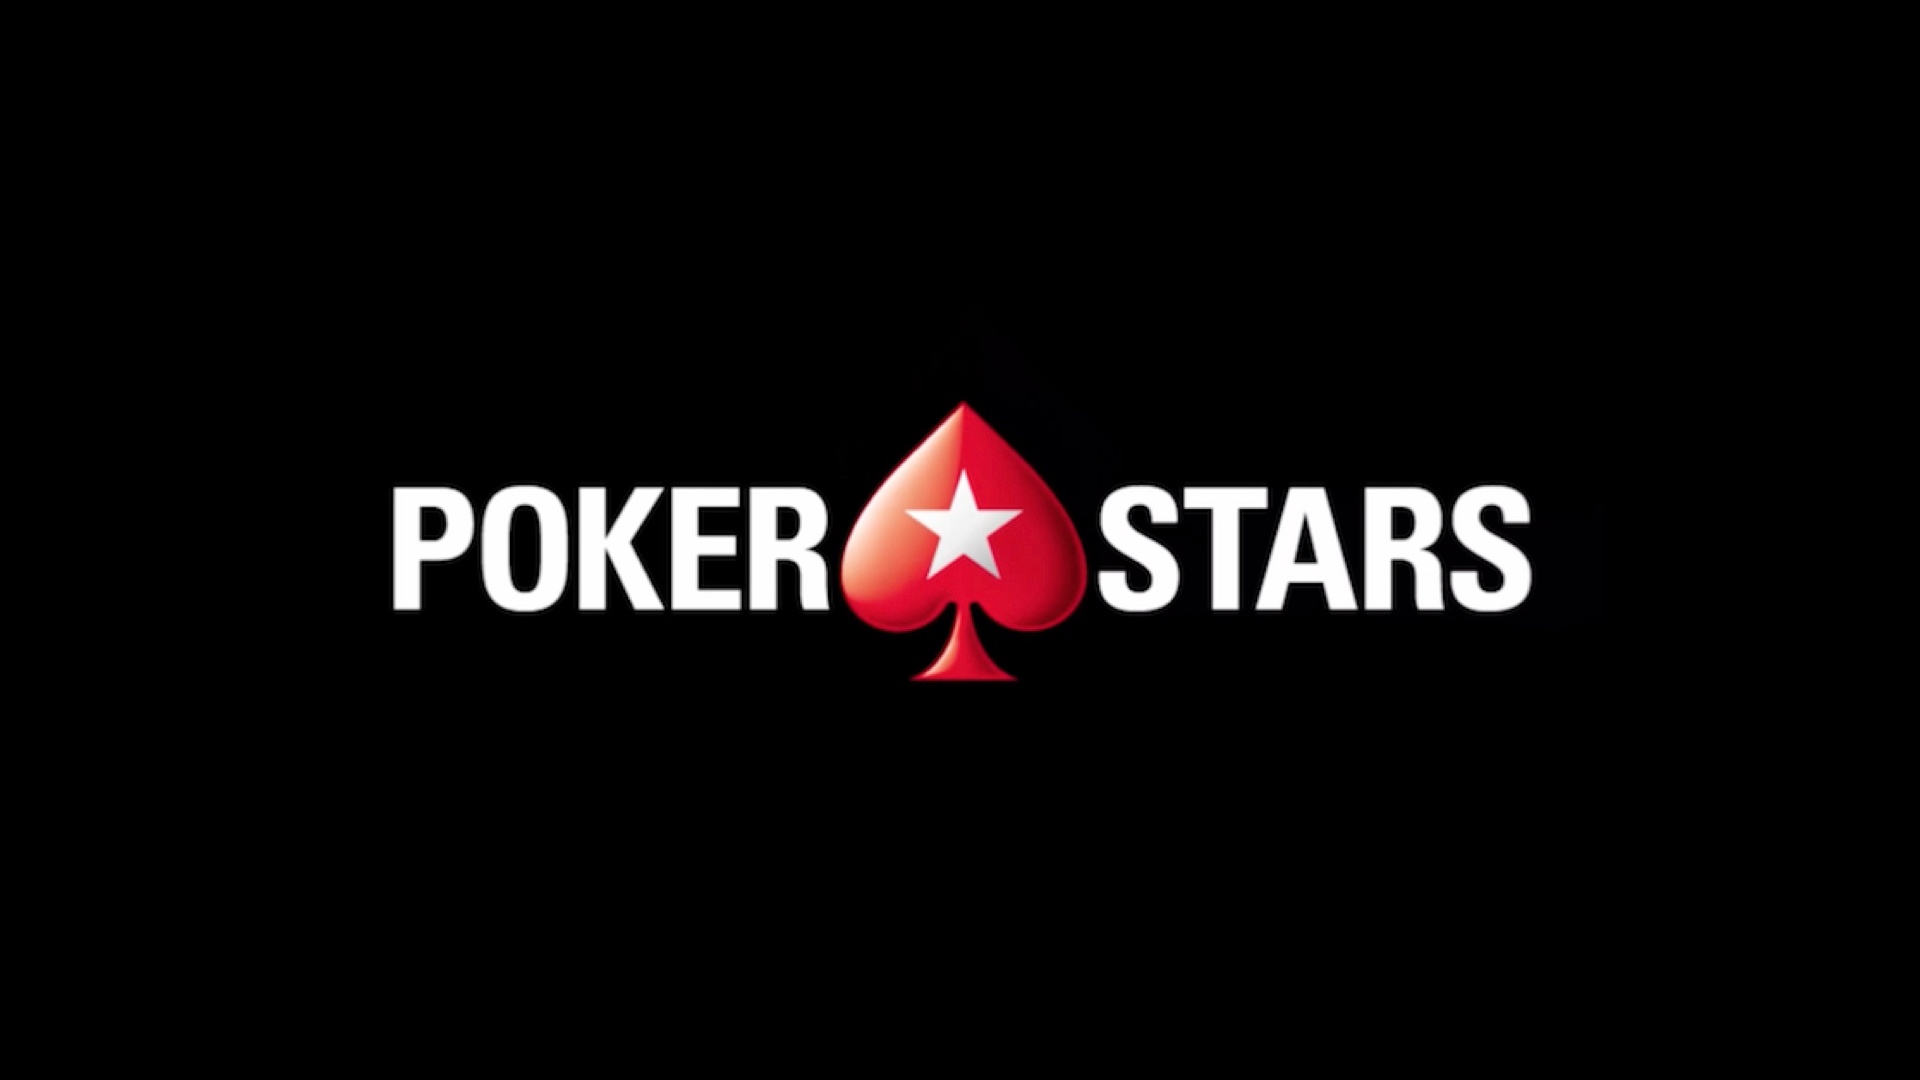 PokerStars Alerts Players in United States about “Cybersecurity Incident” that Exposed Personal Information